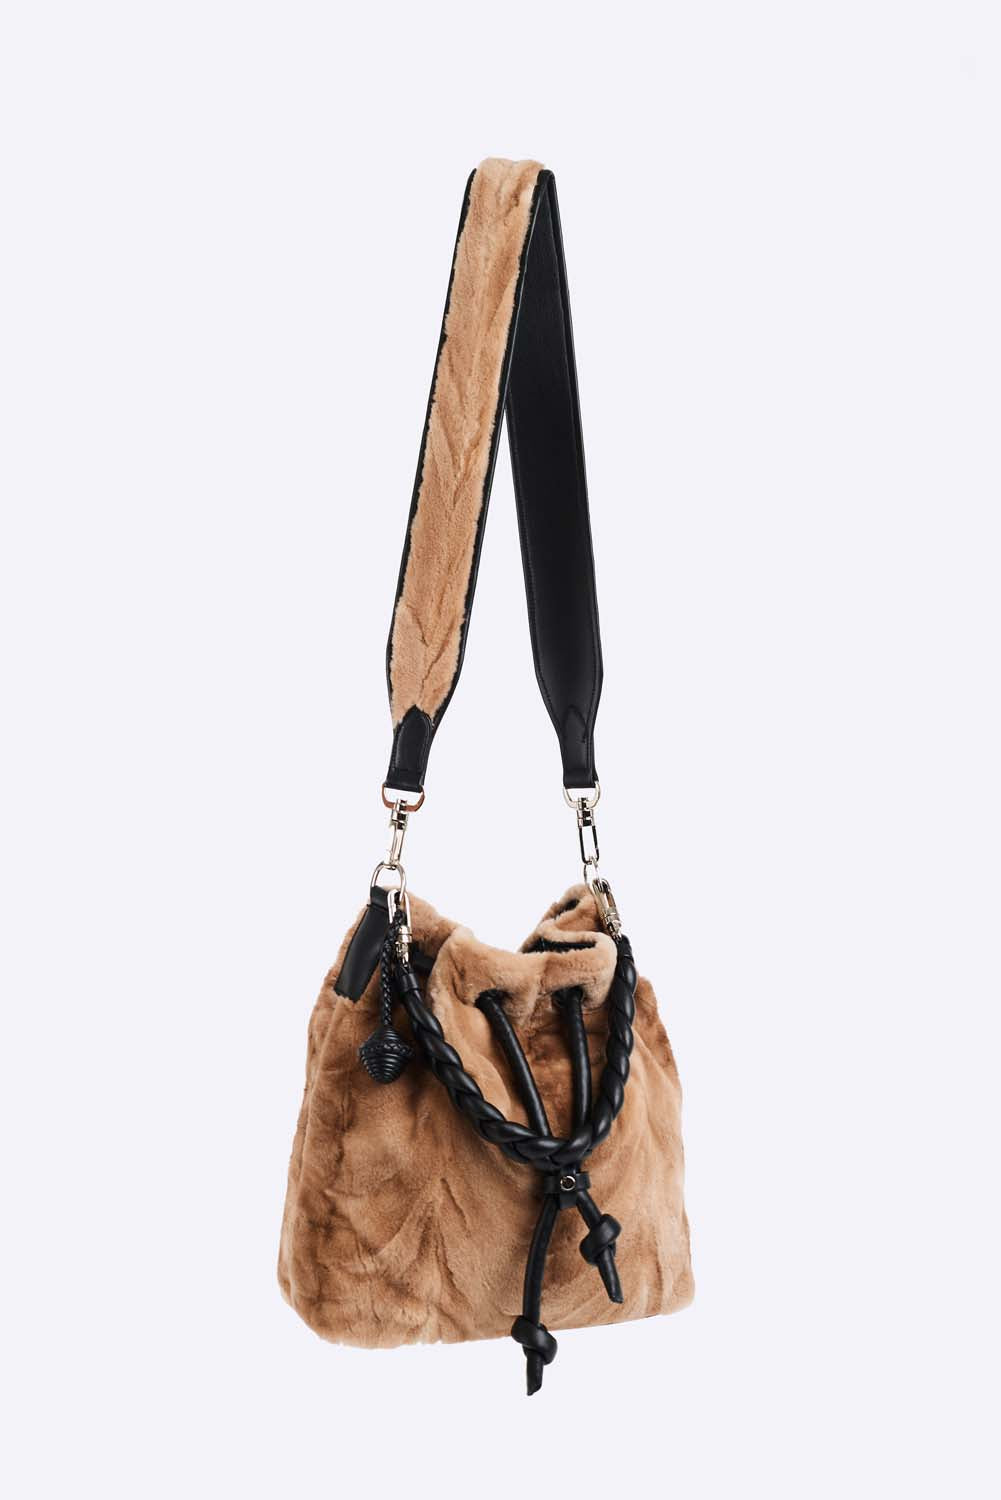 Upcycled natural mink cross body purse. Inside zip patch pocket, polyester lining and leather trim. Cross body fur strap and hand braided high shoulder strap. Handmade leather accessories as well as cut, dyed and stitched by hand. Hand made in Montreal.